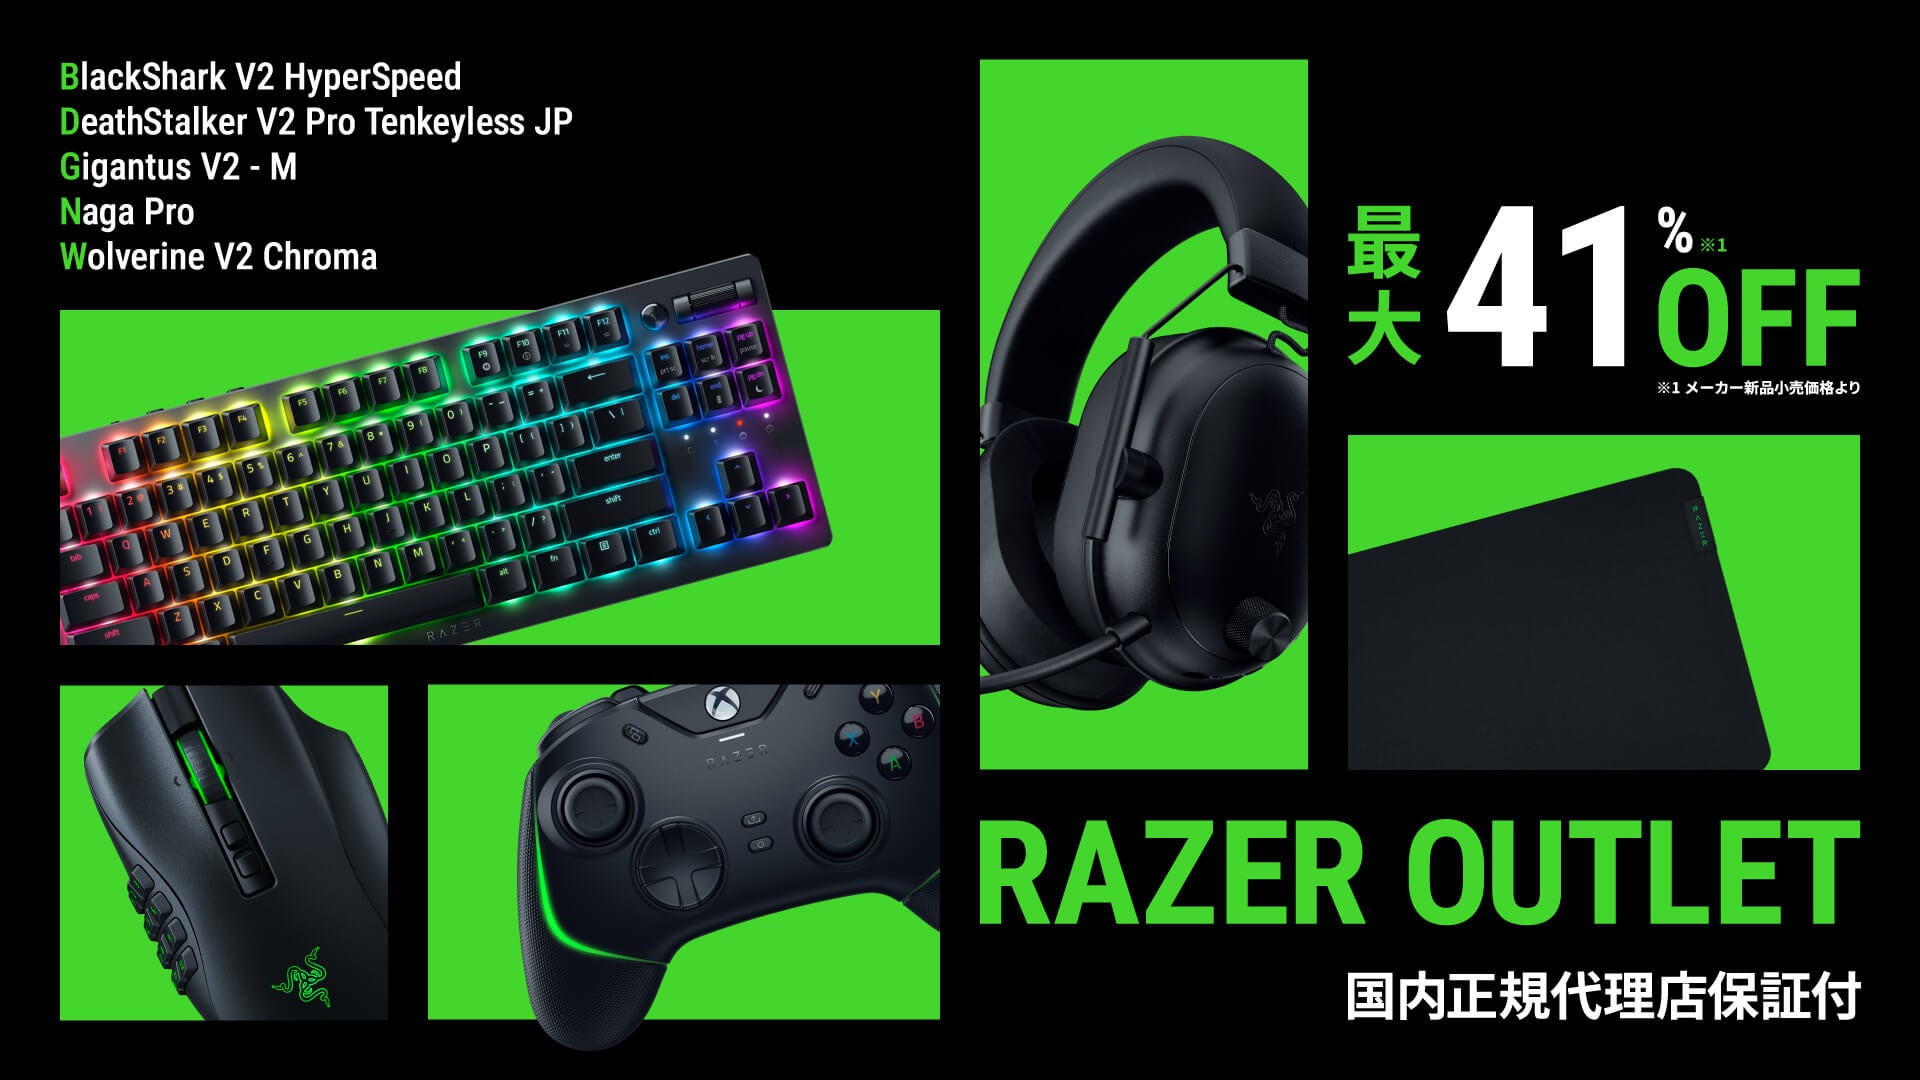 Razer – GRAPHT OFFICIAL STORE